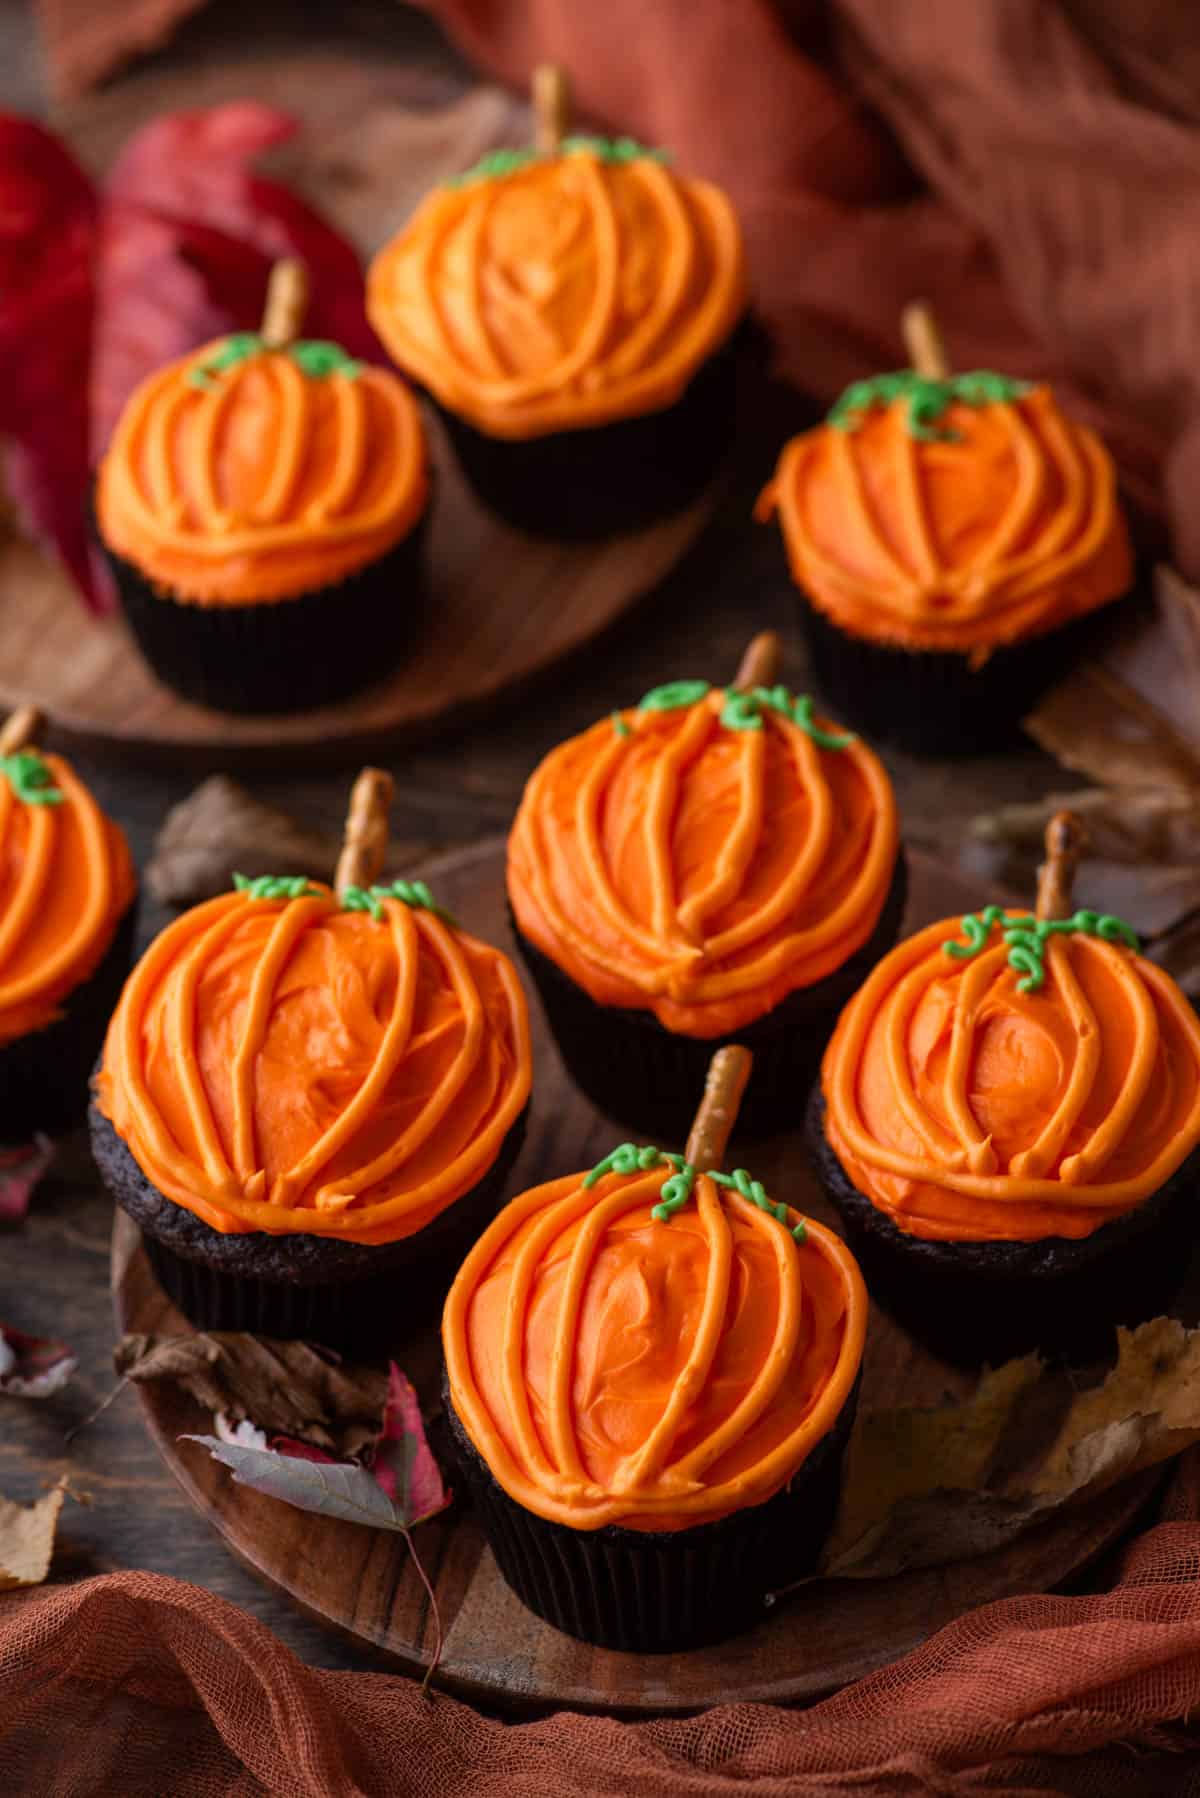 pumpkin patch cupcakes arranged on wood plates with fall leaves around